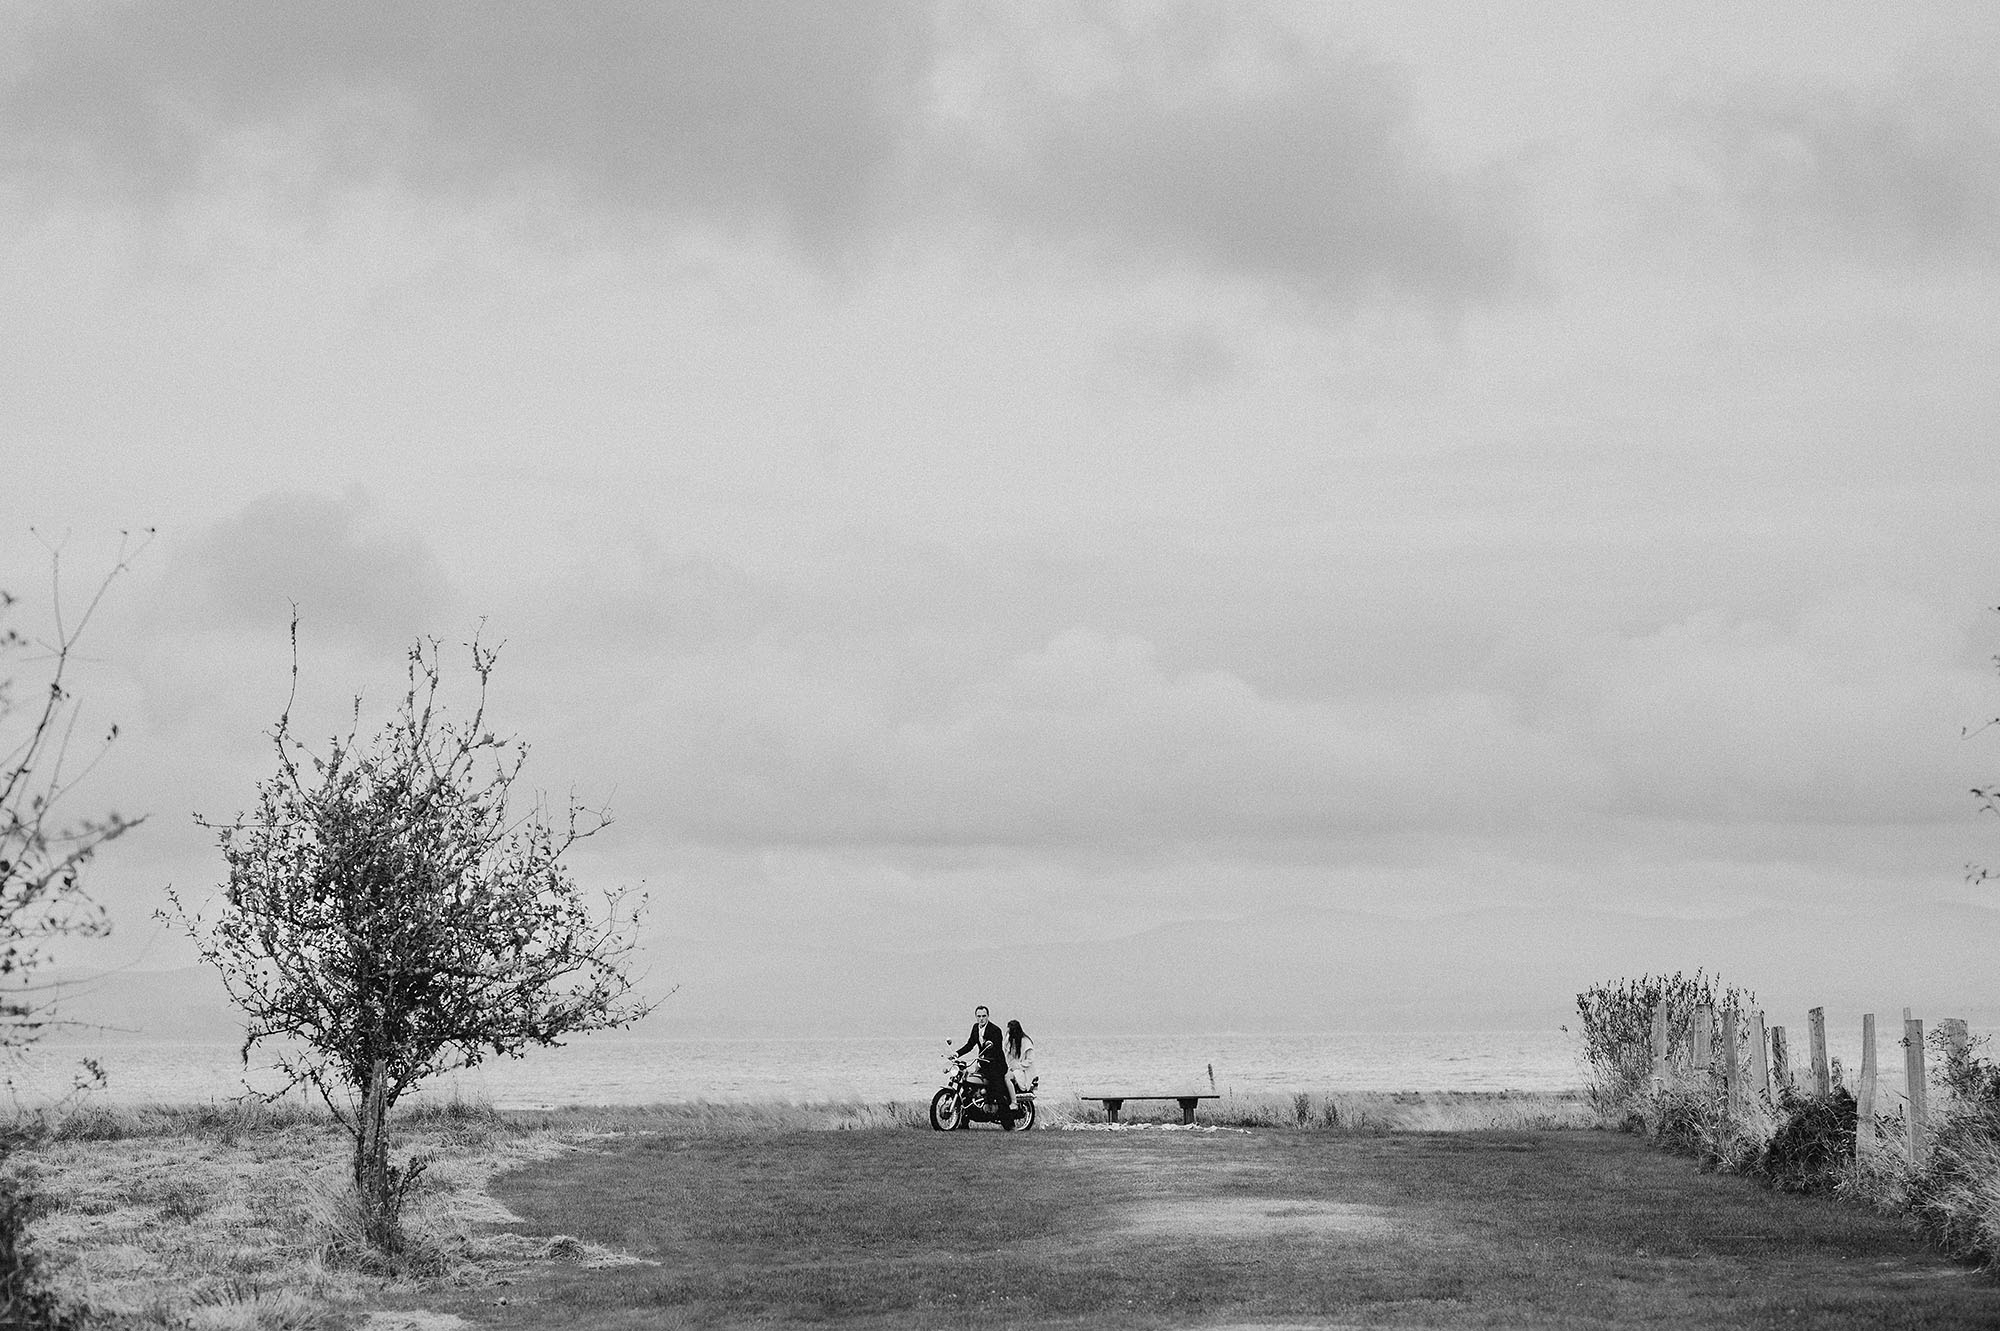 Long Beach Peninsula Wedding Bride & Groom Riding Back on Motorcycle in Black and White by Briana Morrison Photography